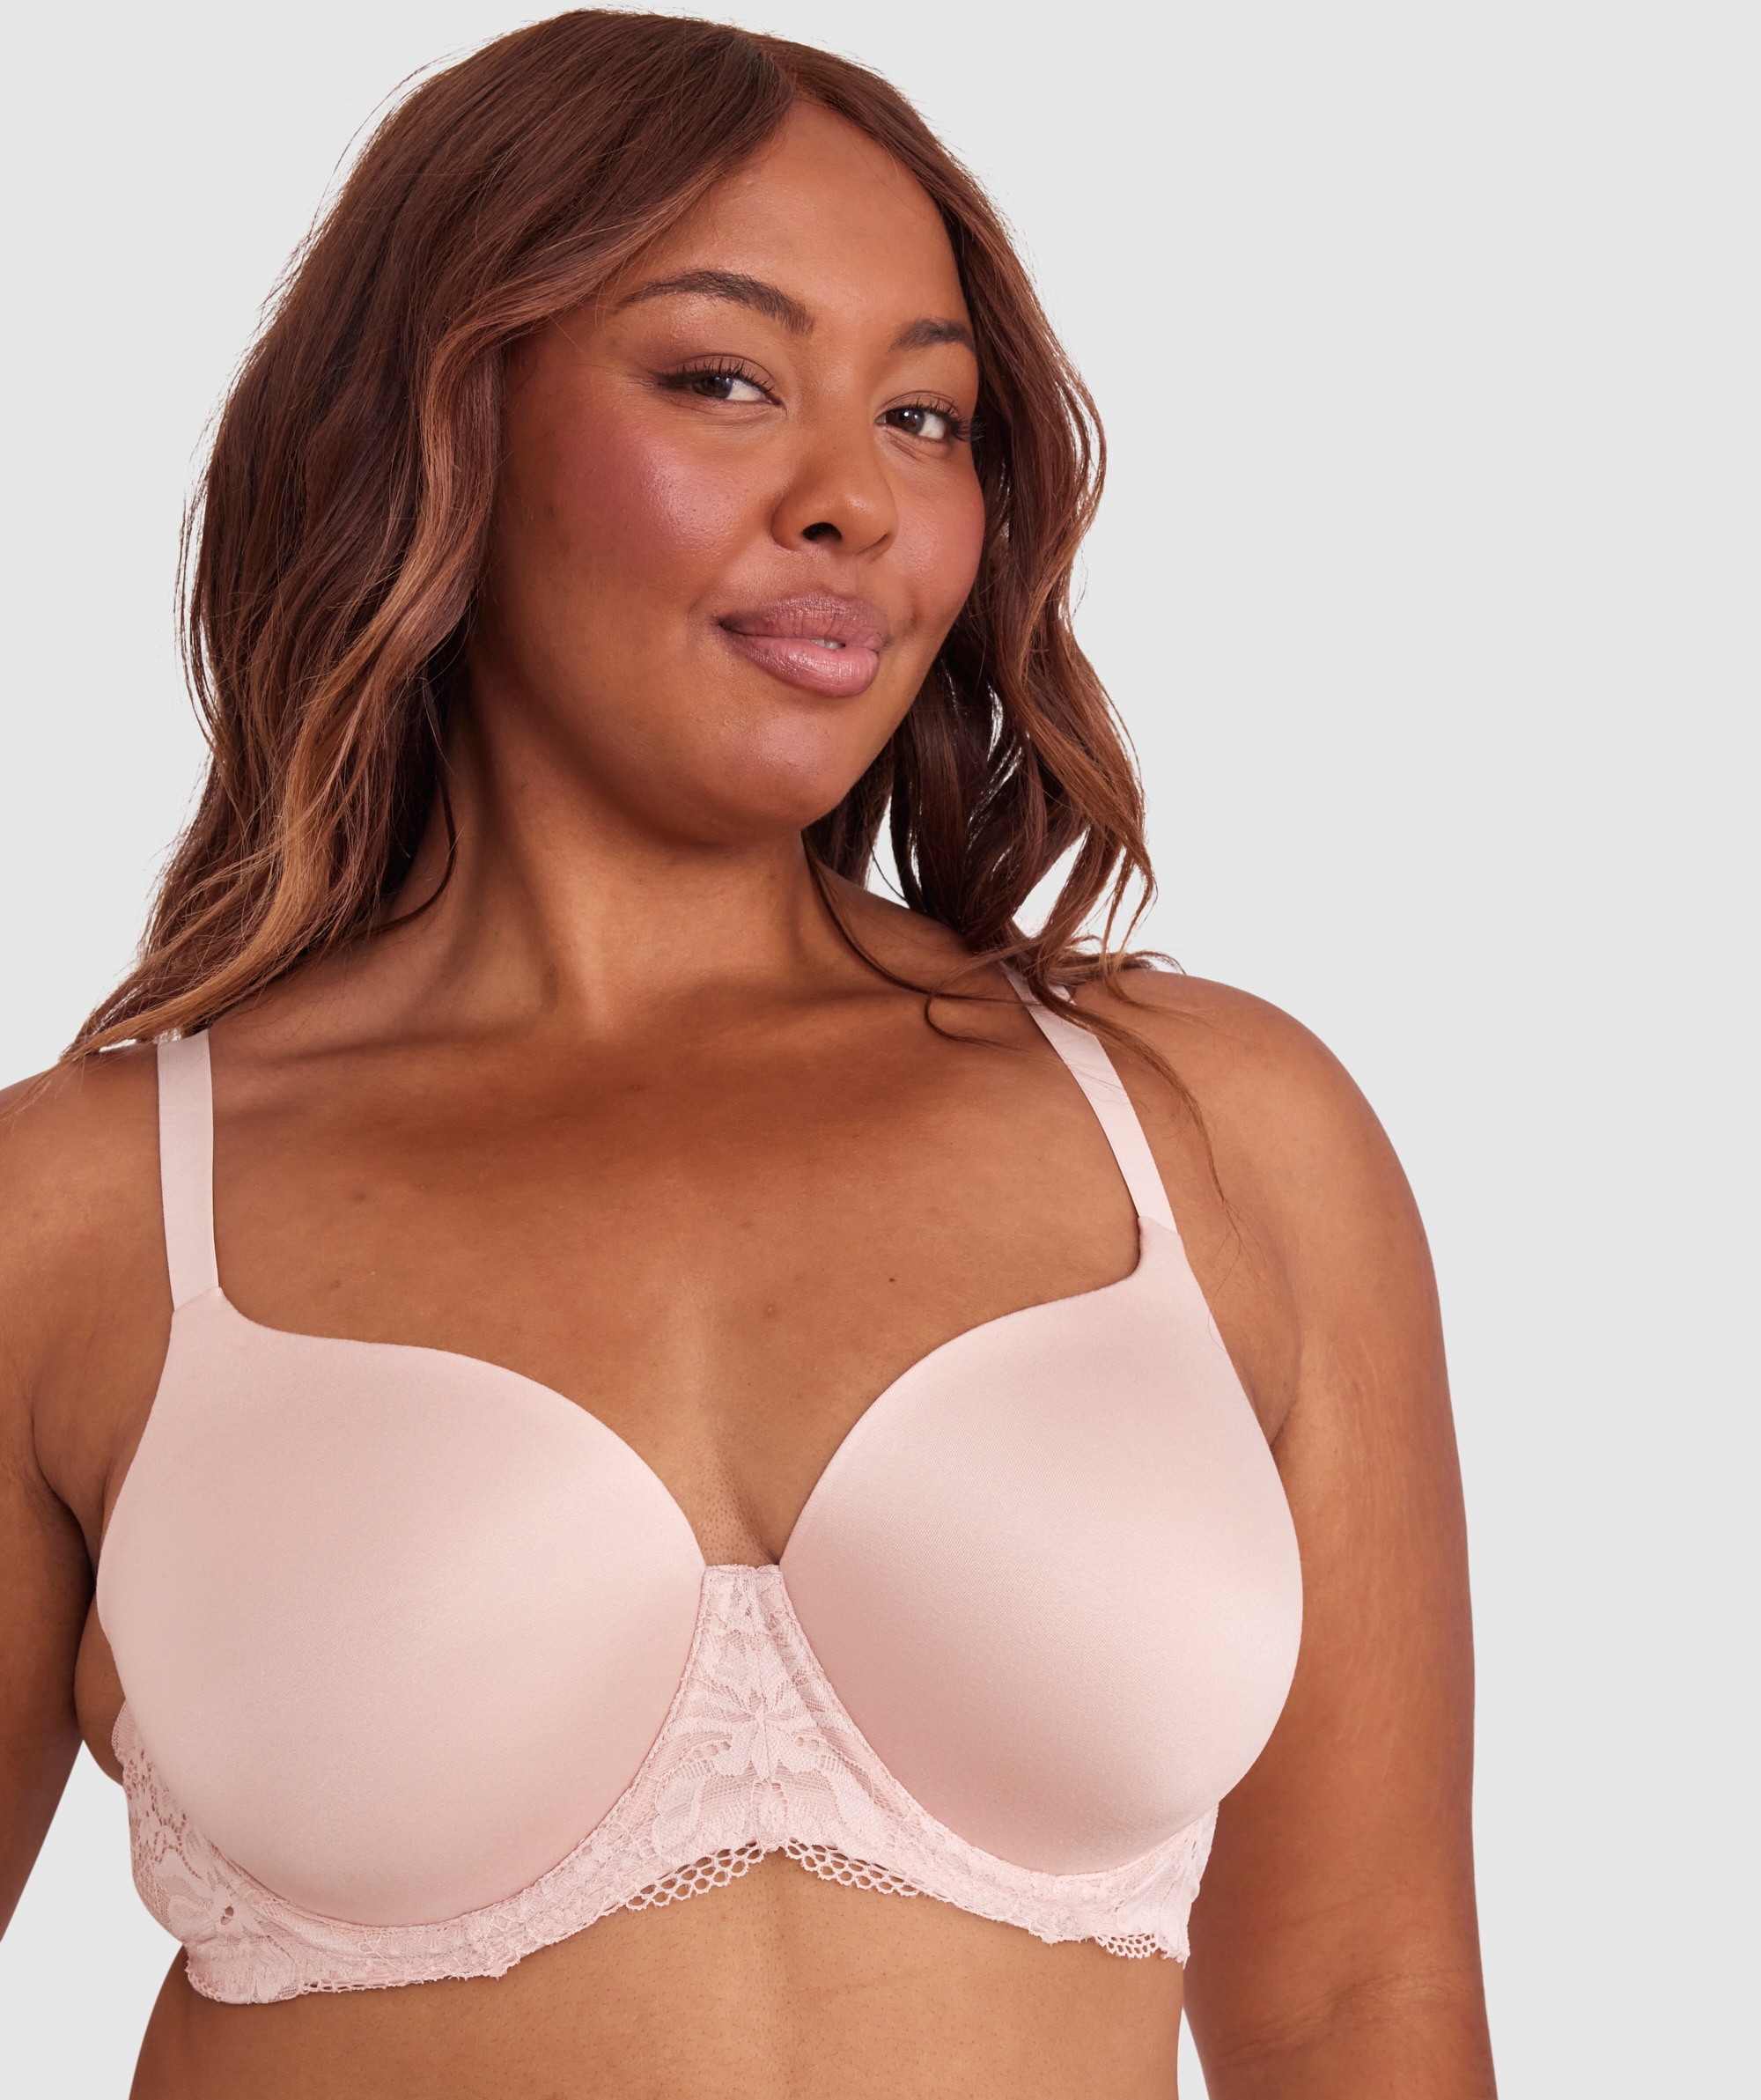 Body Bliss Lace 2nd Gen Full Cup Bra - Blush Pink